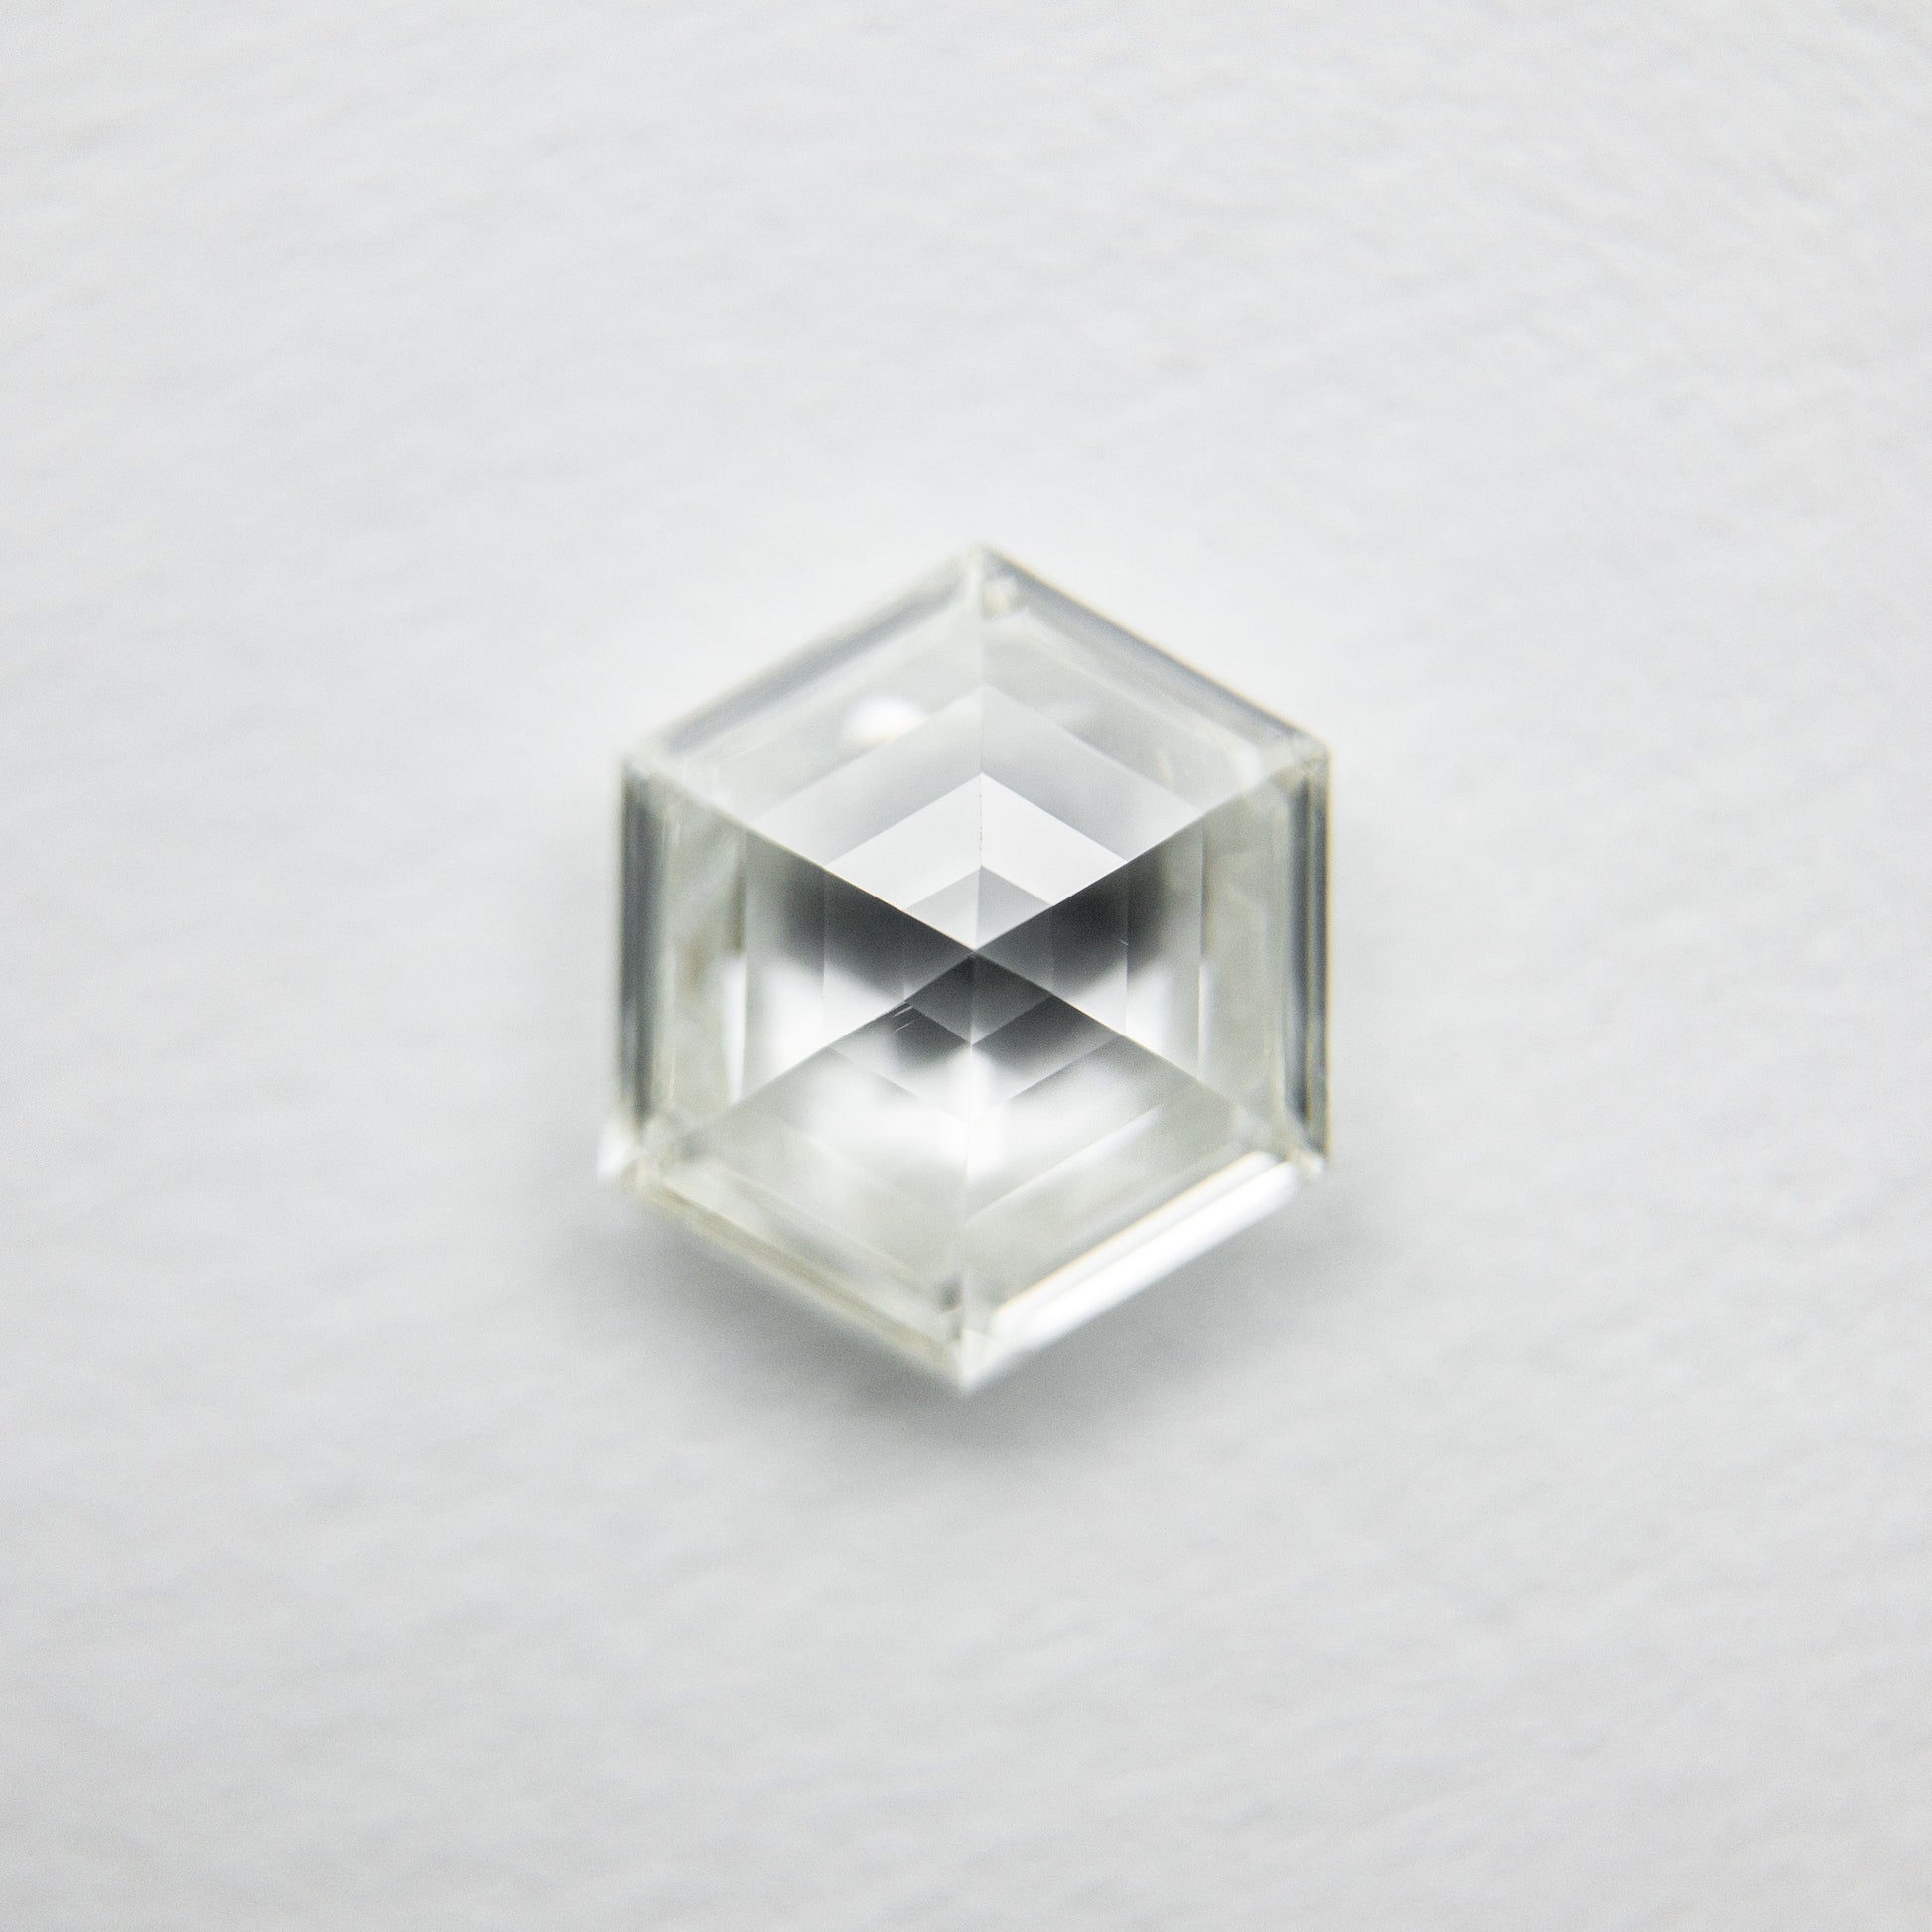 .77 carat Natural Diamond Clear White Hexagon Geometric Diamond for custom work - Inventory code HEXWC77 - Midwinter Co. Alternative Bridal Rings and Modern Fine Jewelry